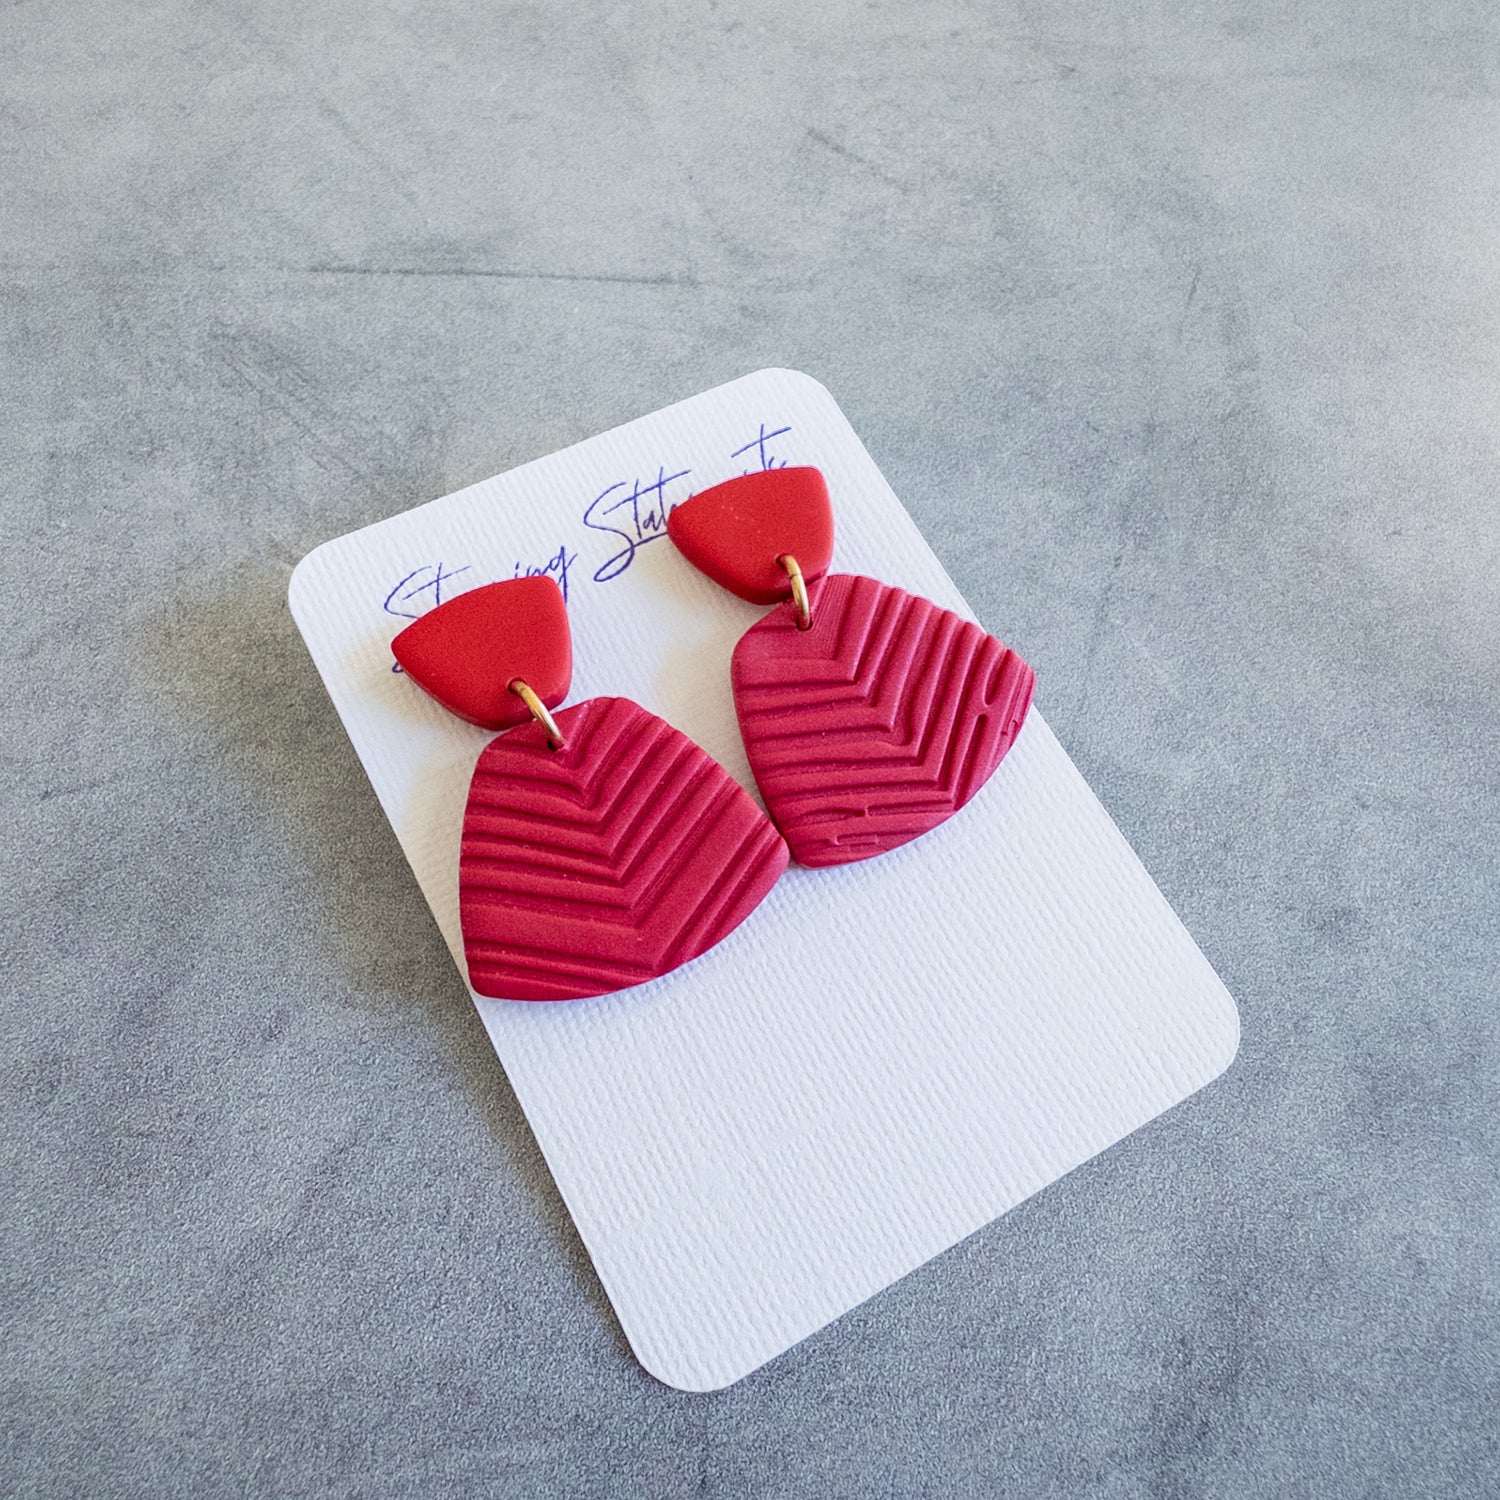 stunning statements fan clay textured statement red blake earrings